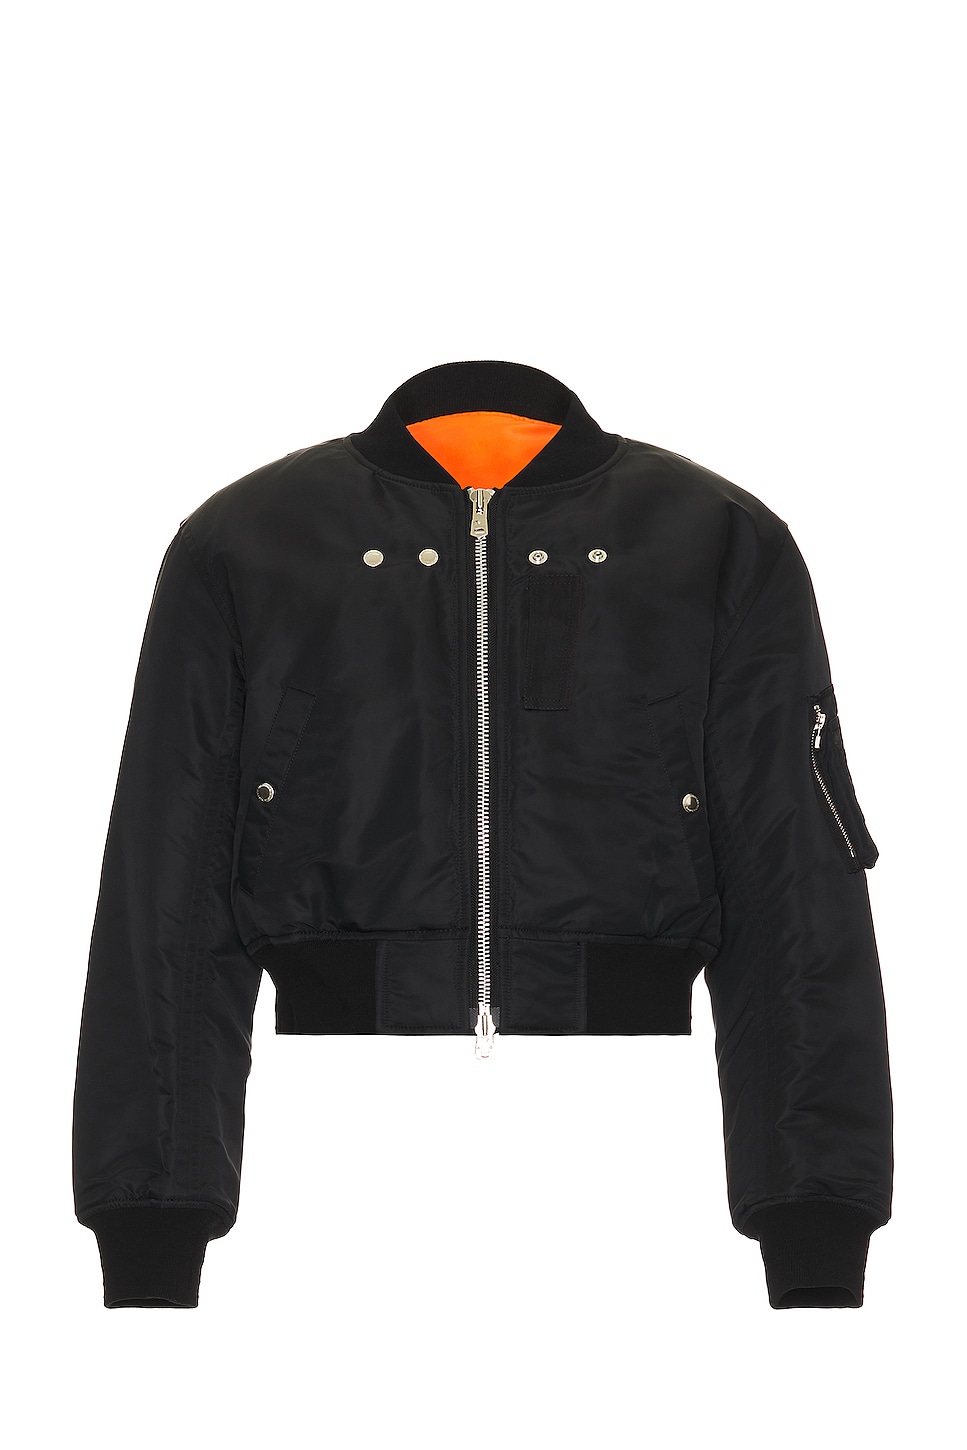 Image 1 of TAKAHIROMIYASHITA The Soloist Two Way Cropped Bomber in Black